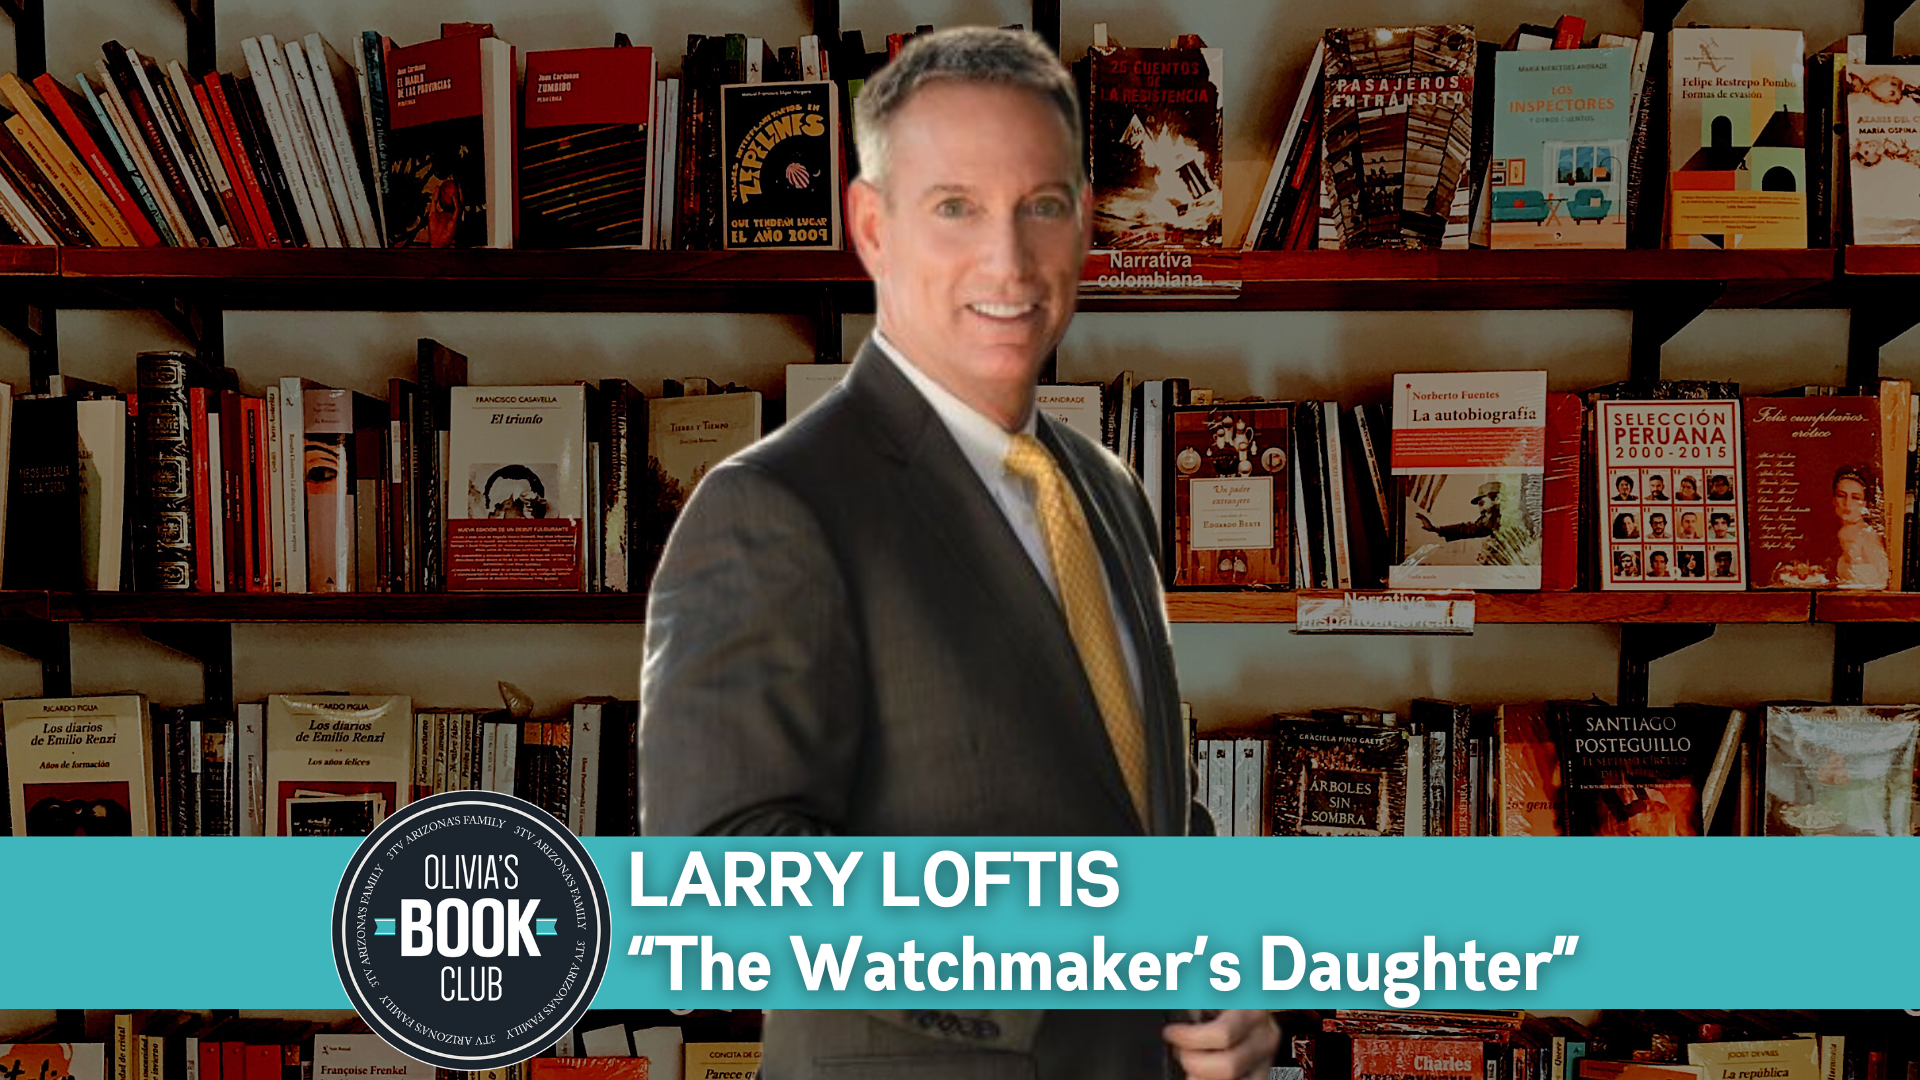 Olivias Book Club Podcast Larry Loftis, “The Watchmakers Daughter The True Story of World War II Heroine Corrie Ten Boom” picture